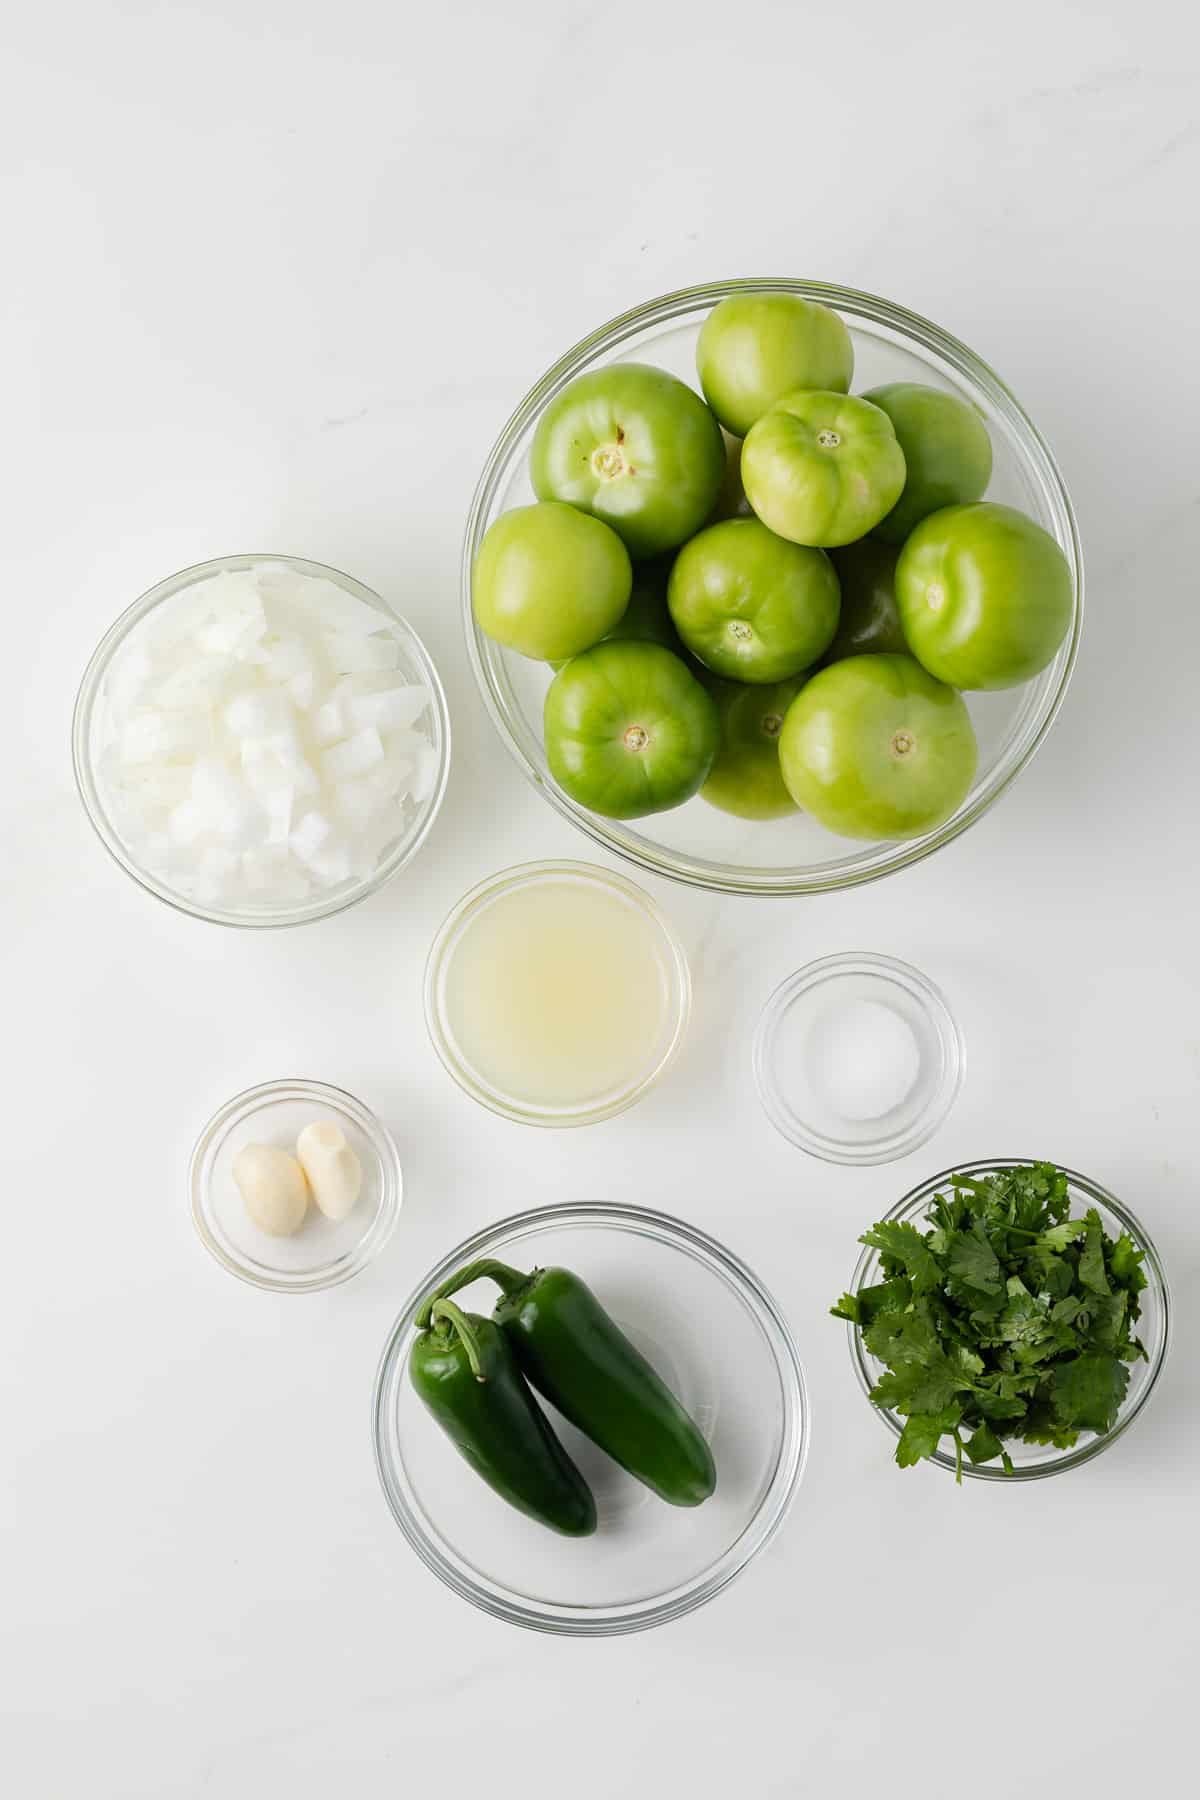 Ingredients for salsa verde in glass bowls.